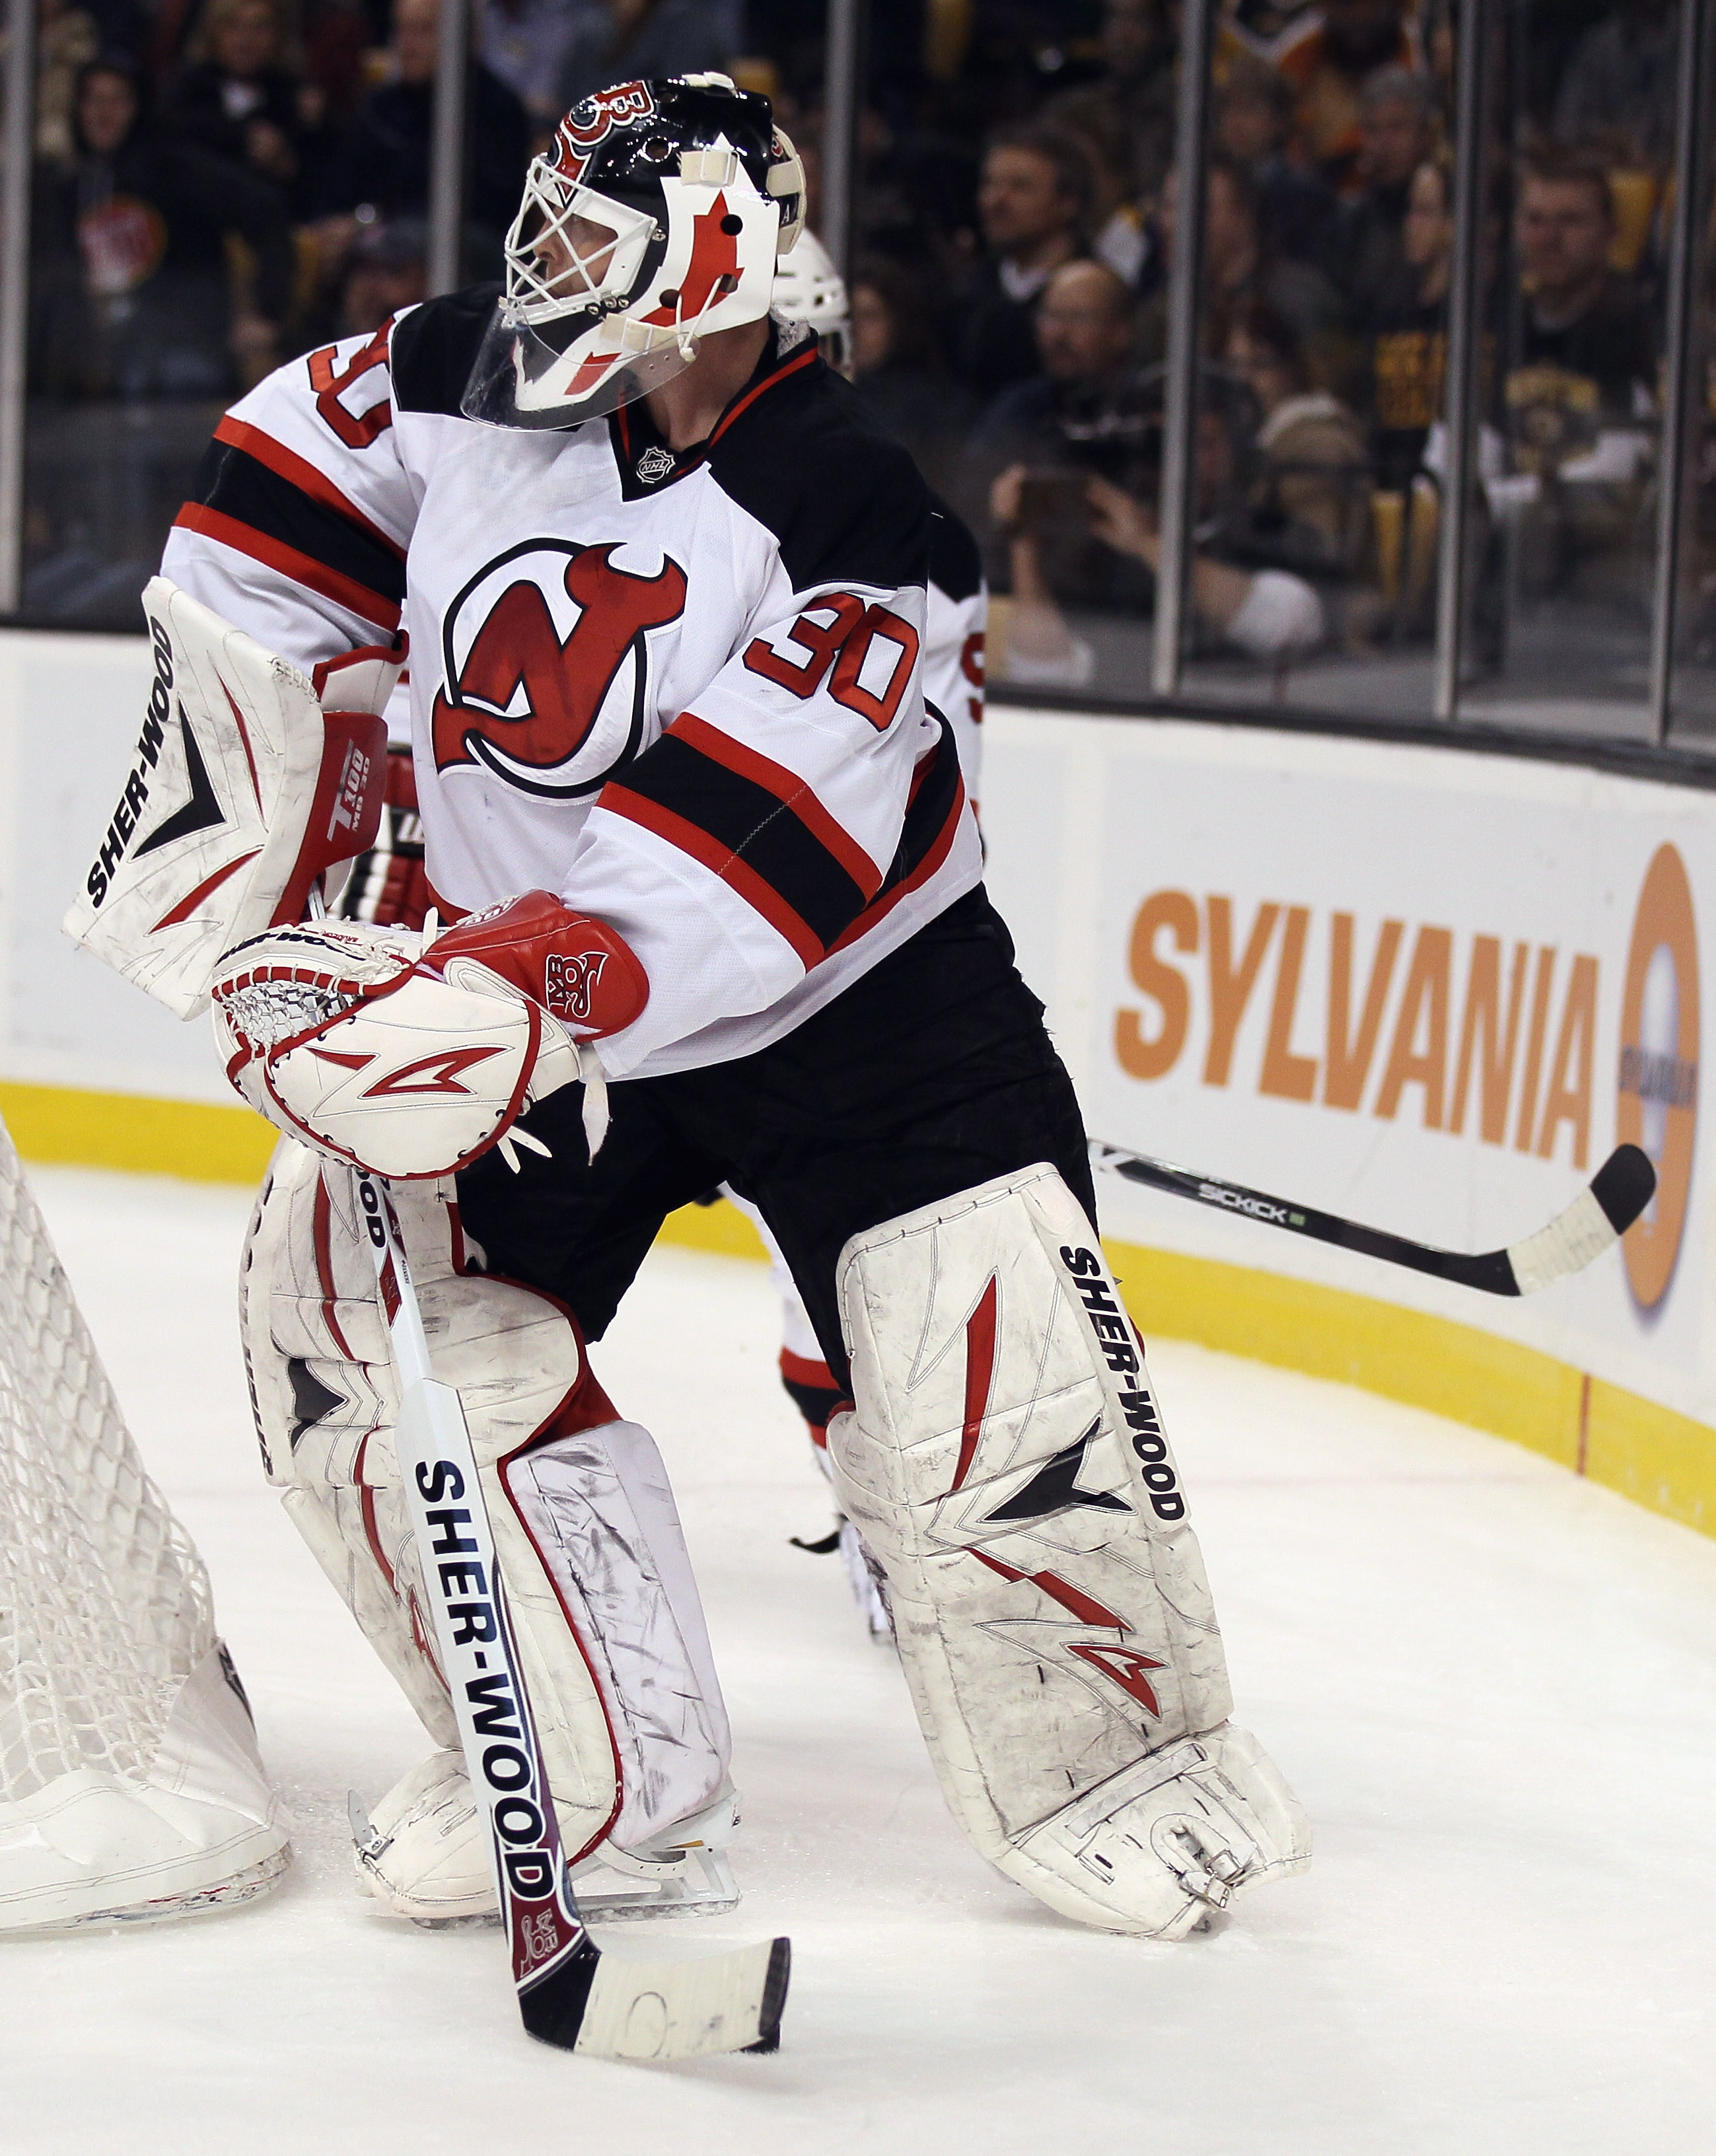 BOSTON - NOVEMBER 15:  Martin Brodeur #30 of the New Jersey Devils clears the puck in the first period against the Boston Bruins on November 15, 2010 at the TD Garden in Boston, Massachusetts.  (Photo by Elsa/Getty Images)